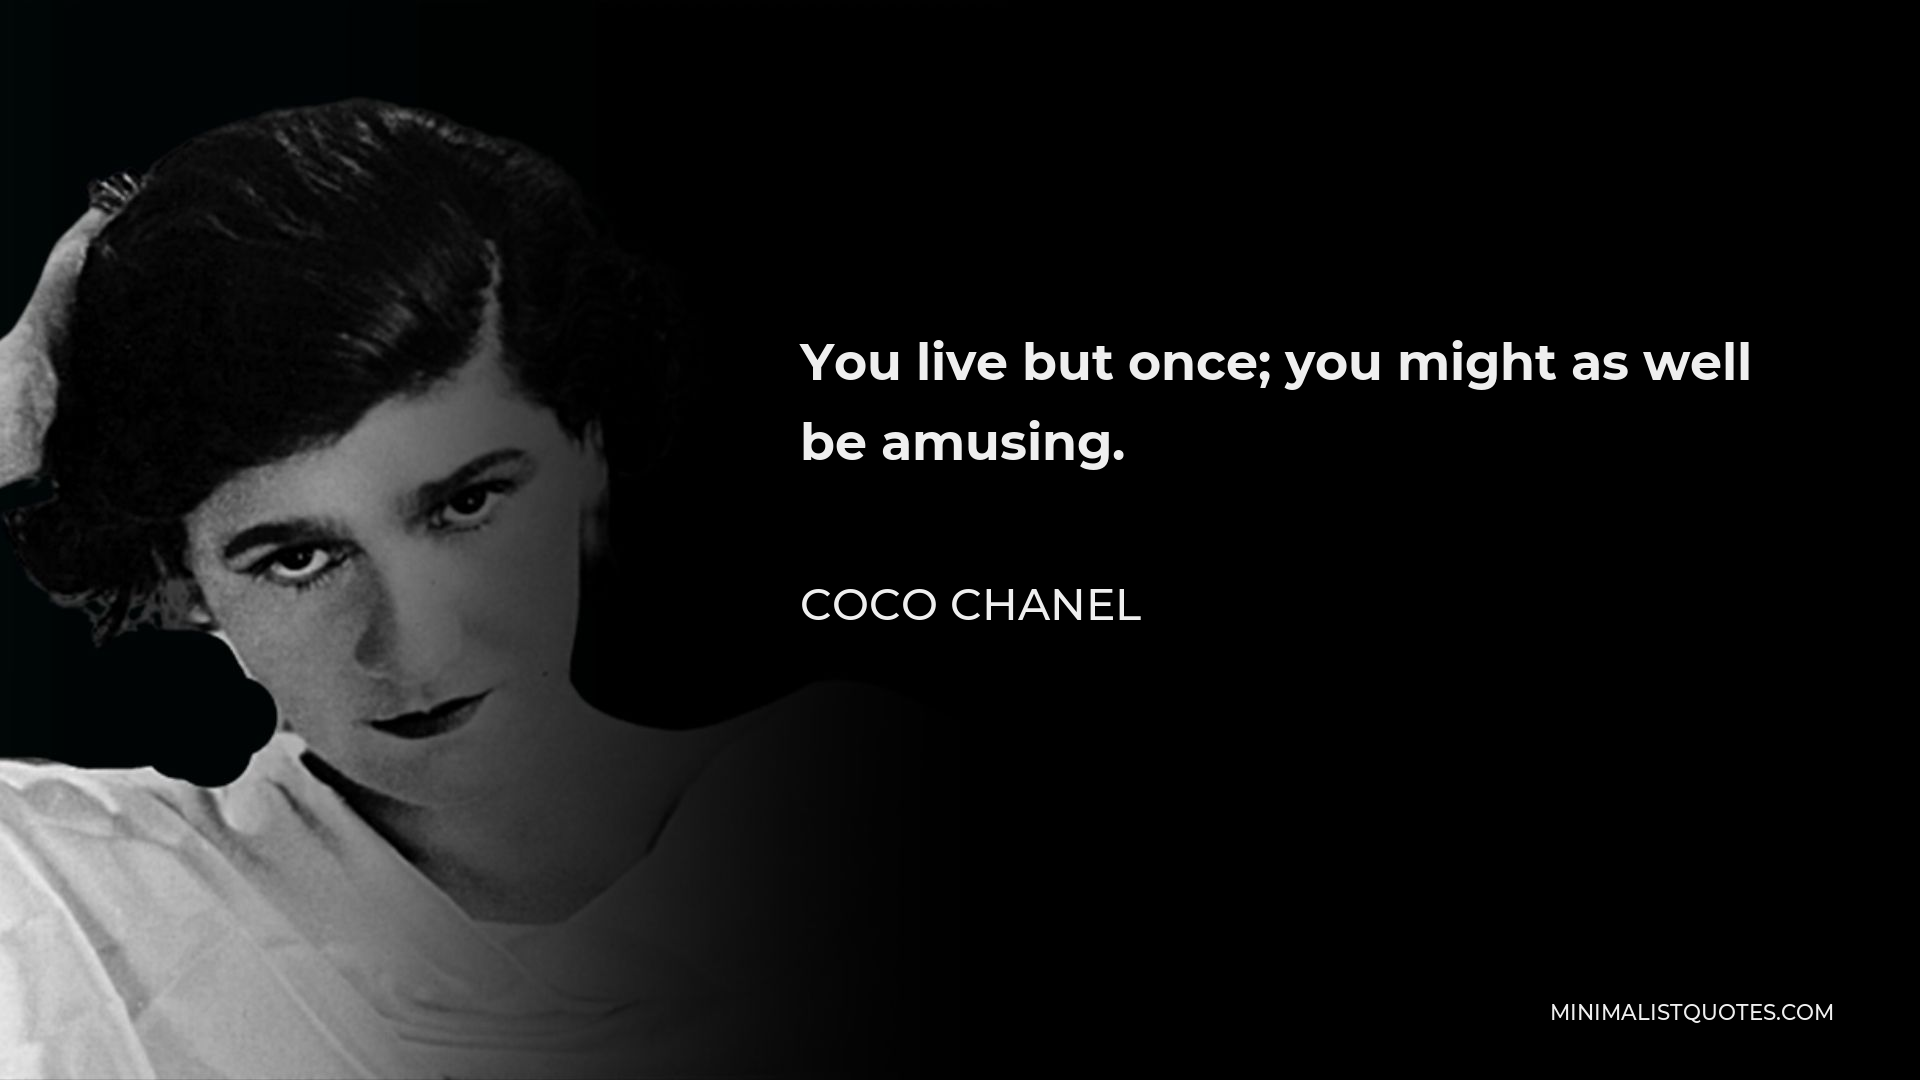 Coco Chanel Quote - You live but once; you might as well be amusing.